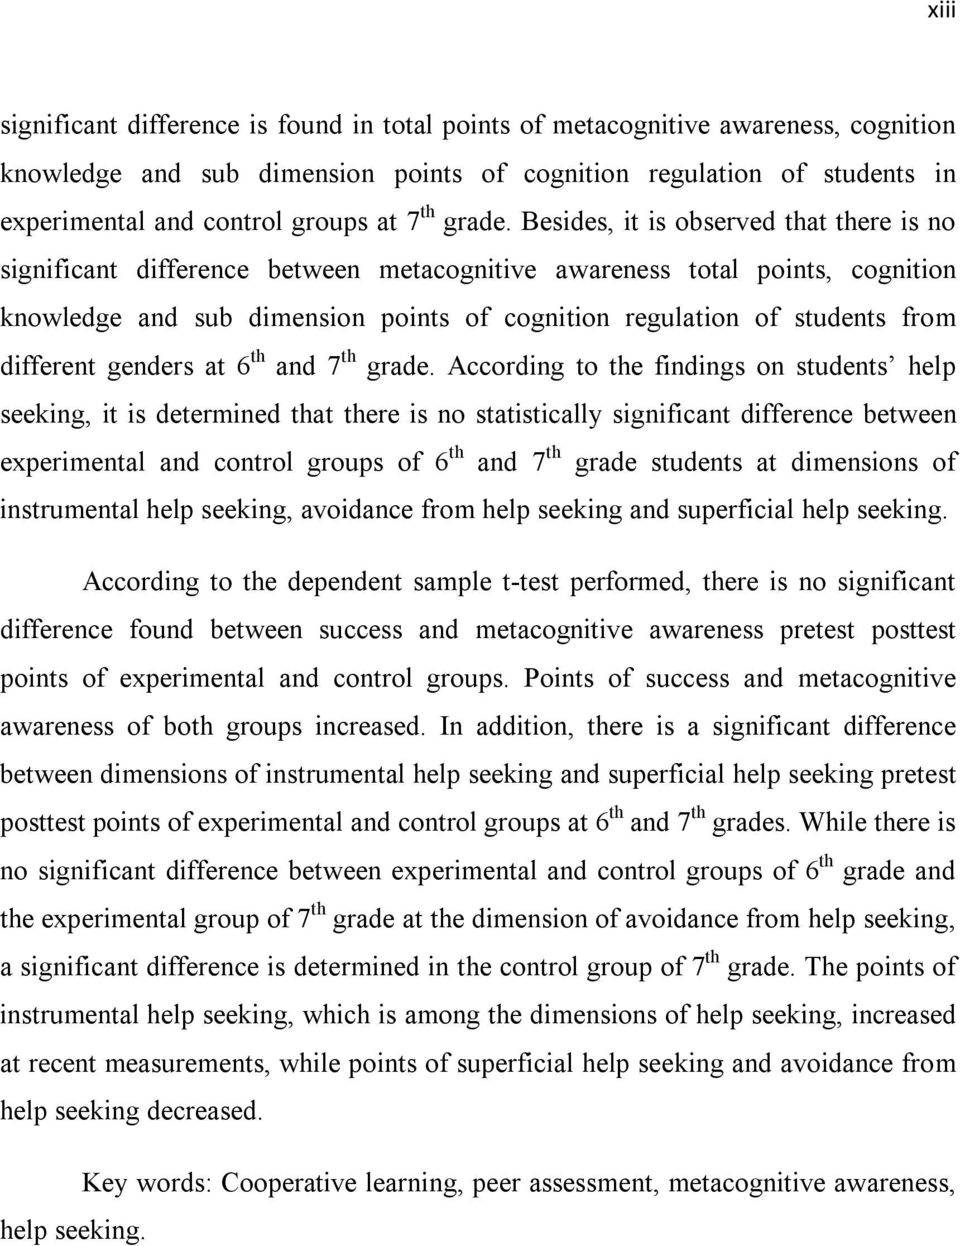 Besides, it is observed that there is no significant difference between metacognitive awareness total points, cognition knowledge and sub dimension points of cognition regulation of students from